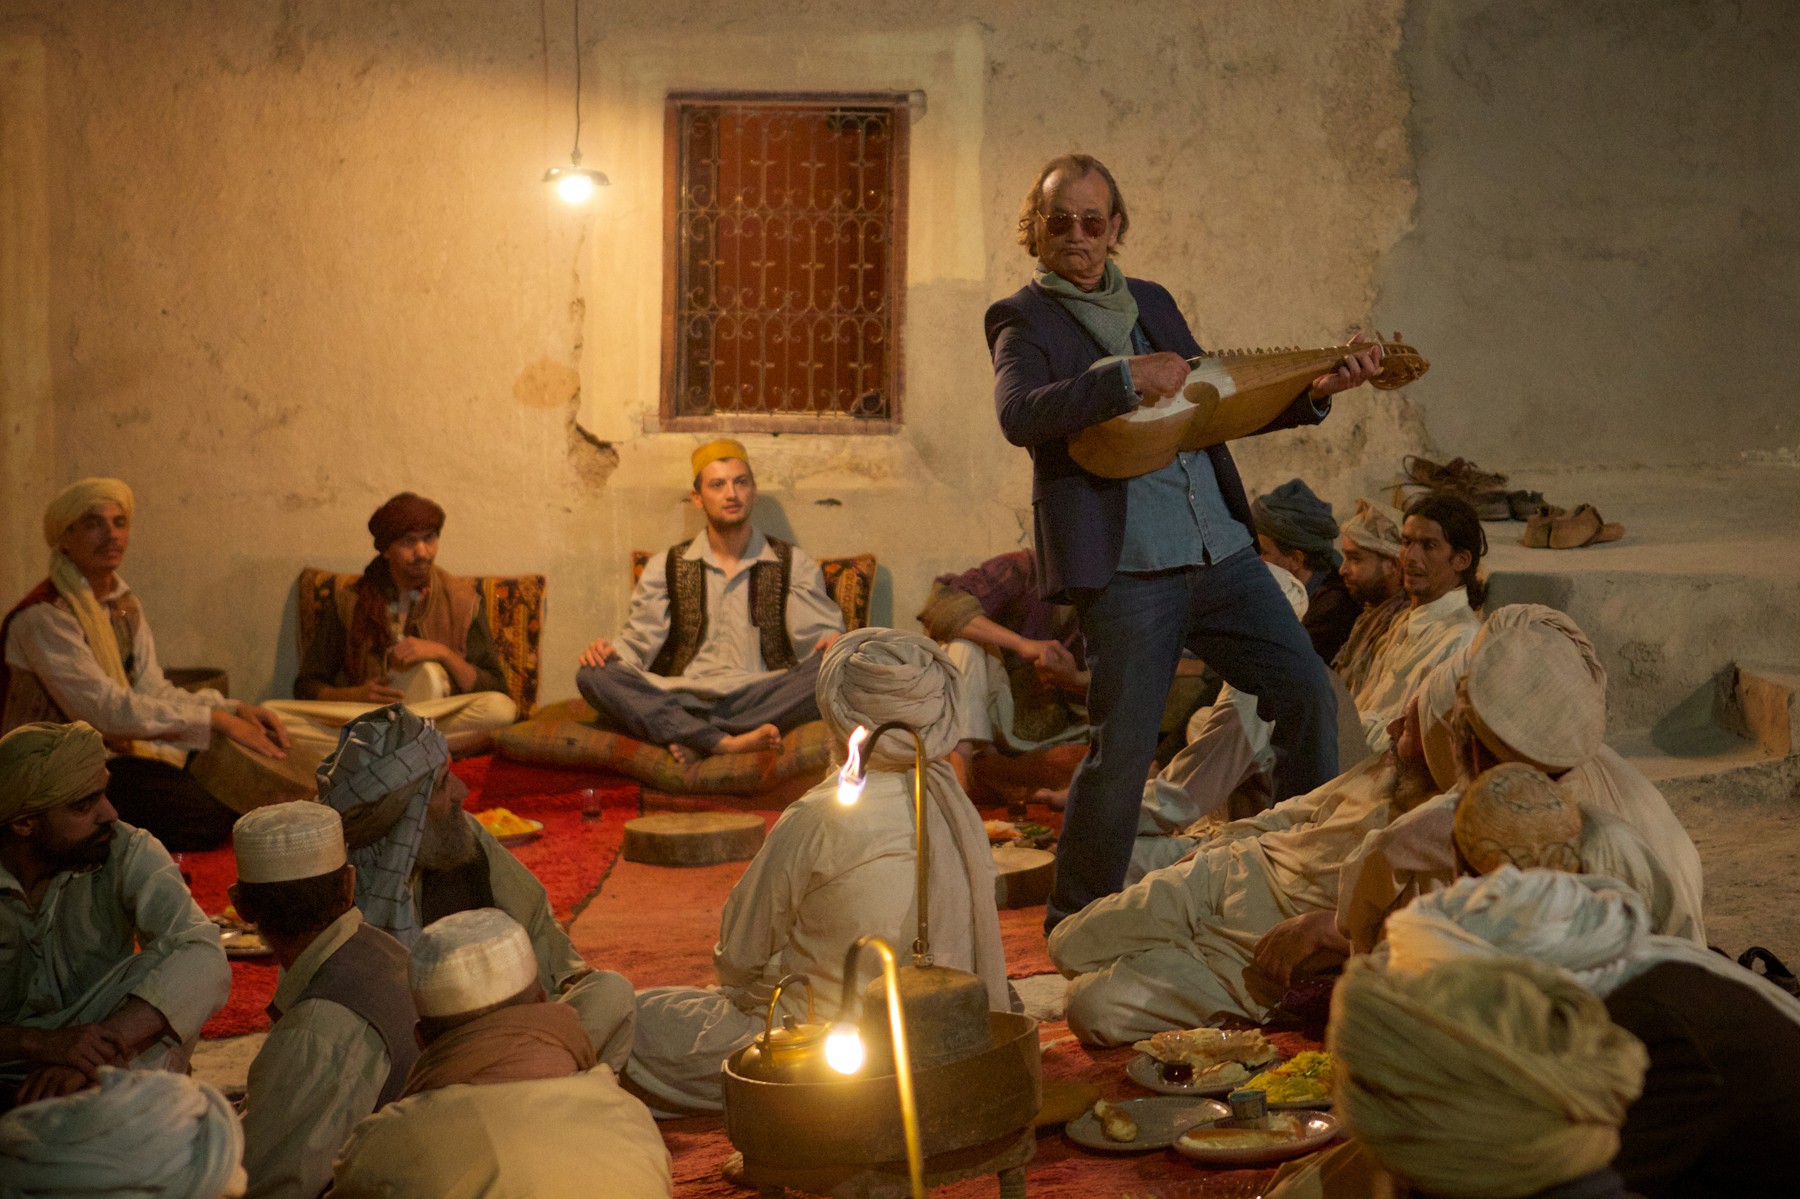 ROCK THE KASBAH Could Use Some Fine-Tuning